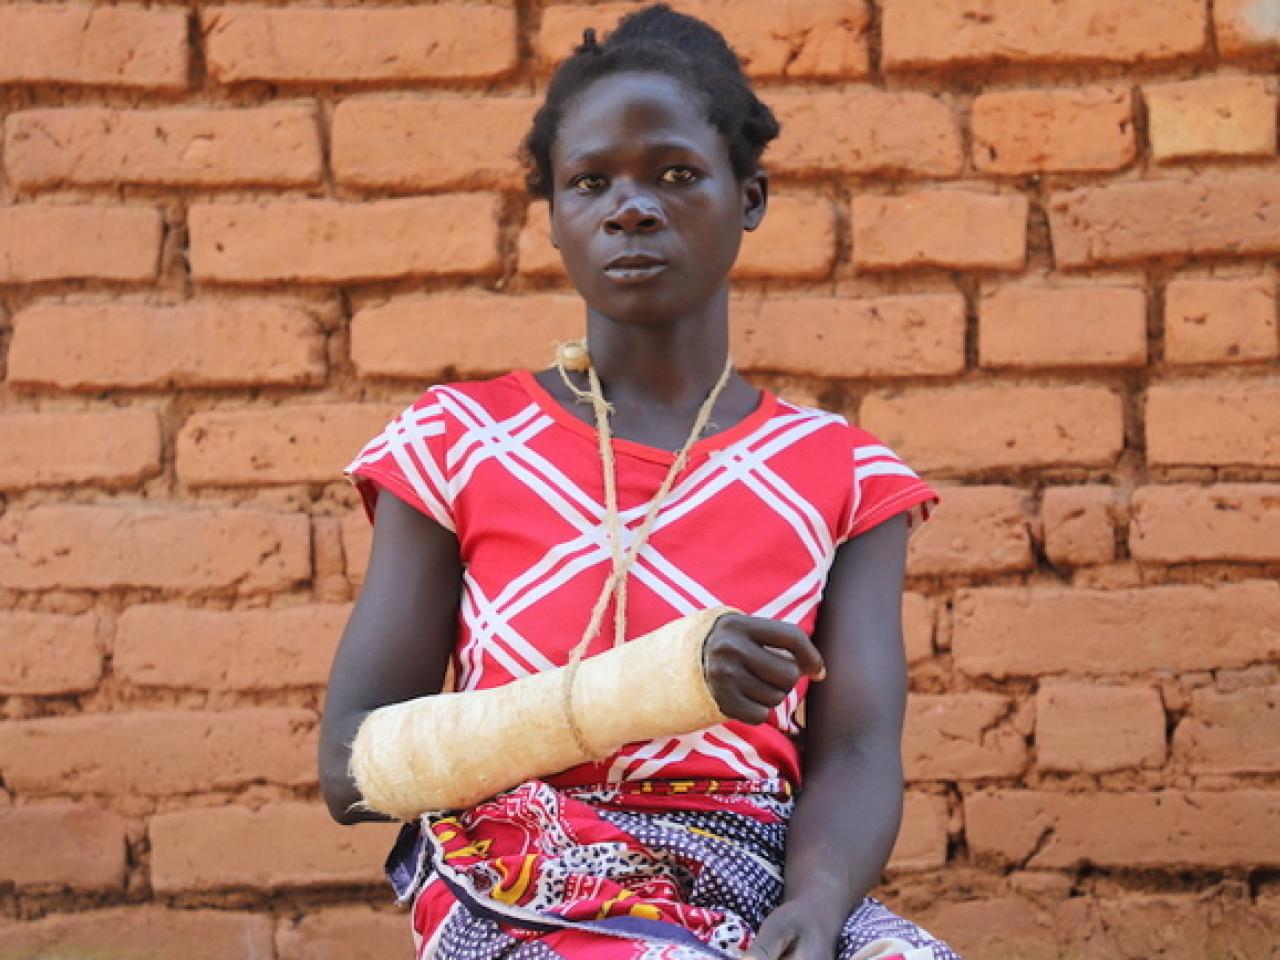 A young woman stands against a brick wall with her arm in a cast